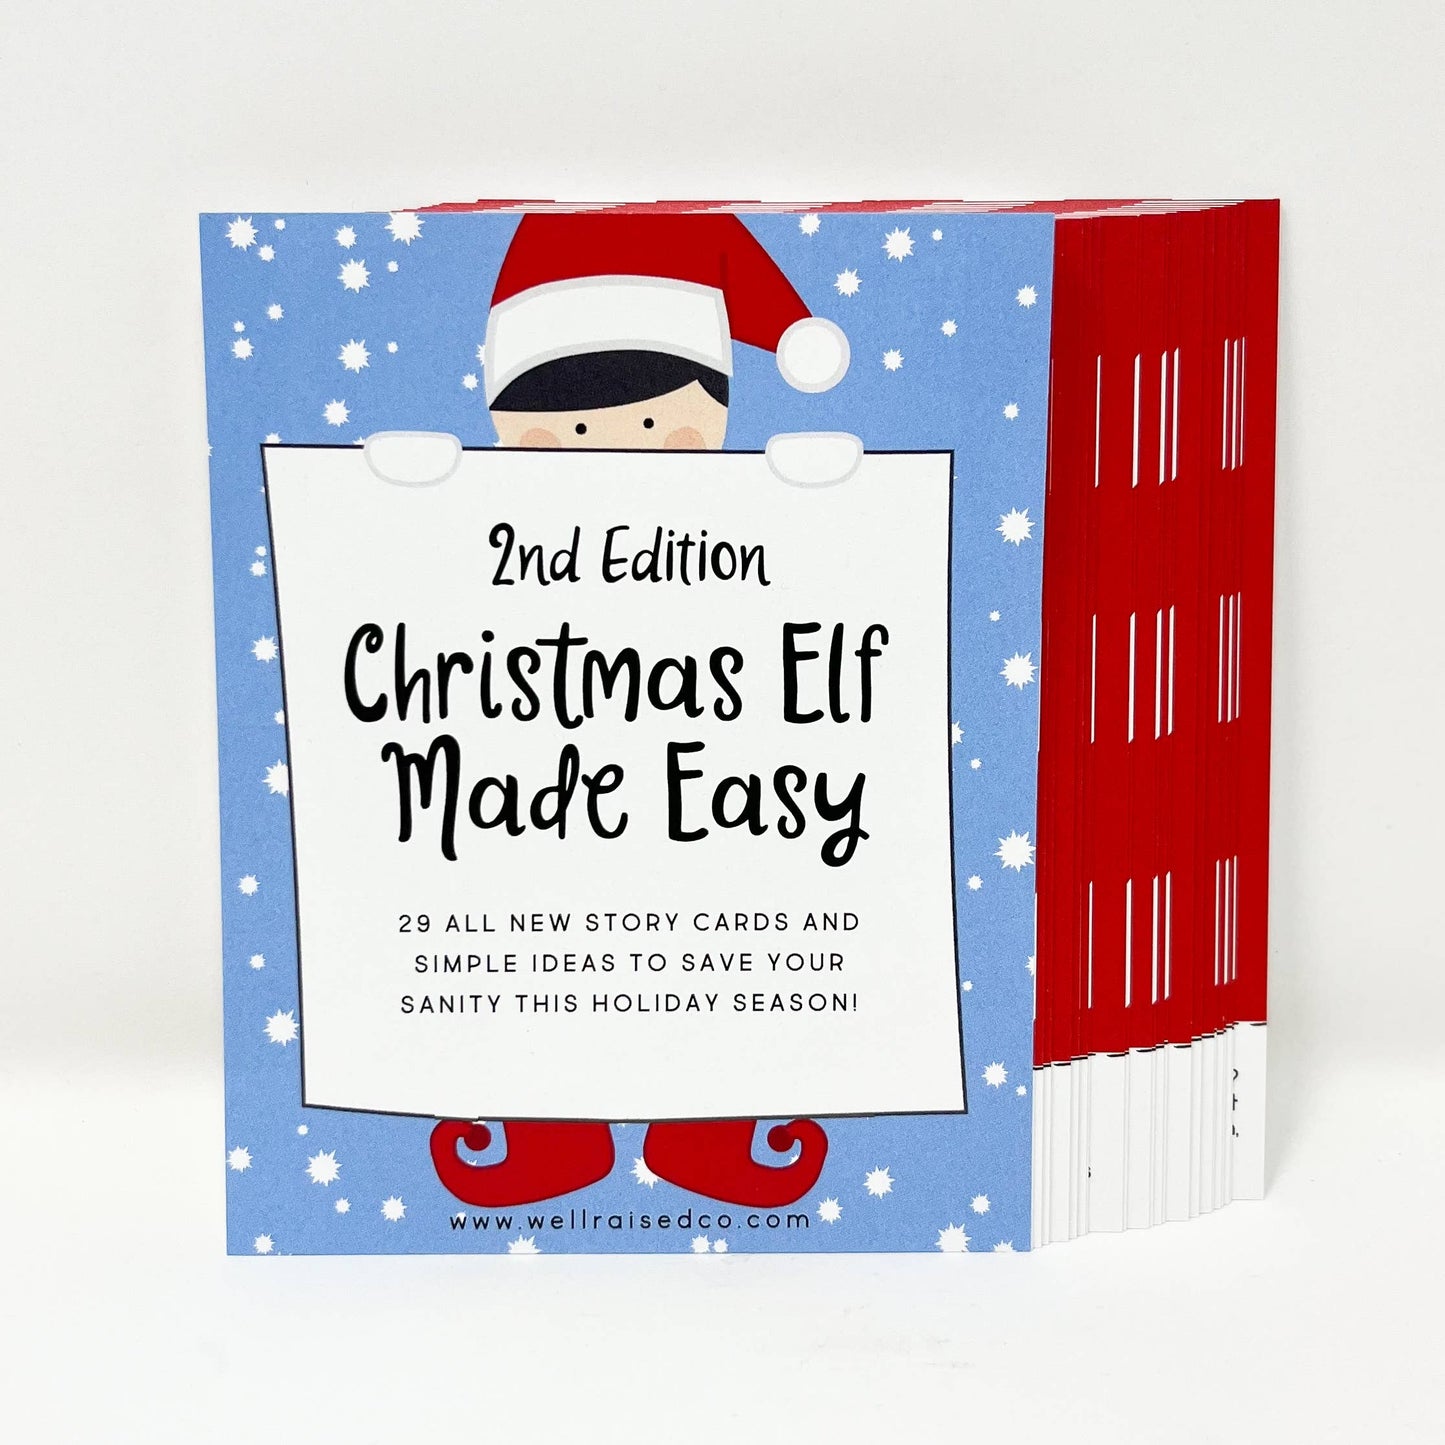 2nd Edition "Christmas Elf Made Easy" Cards